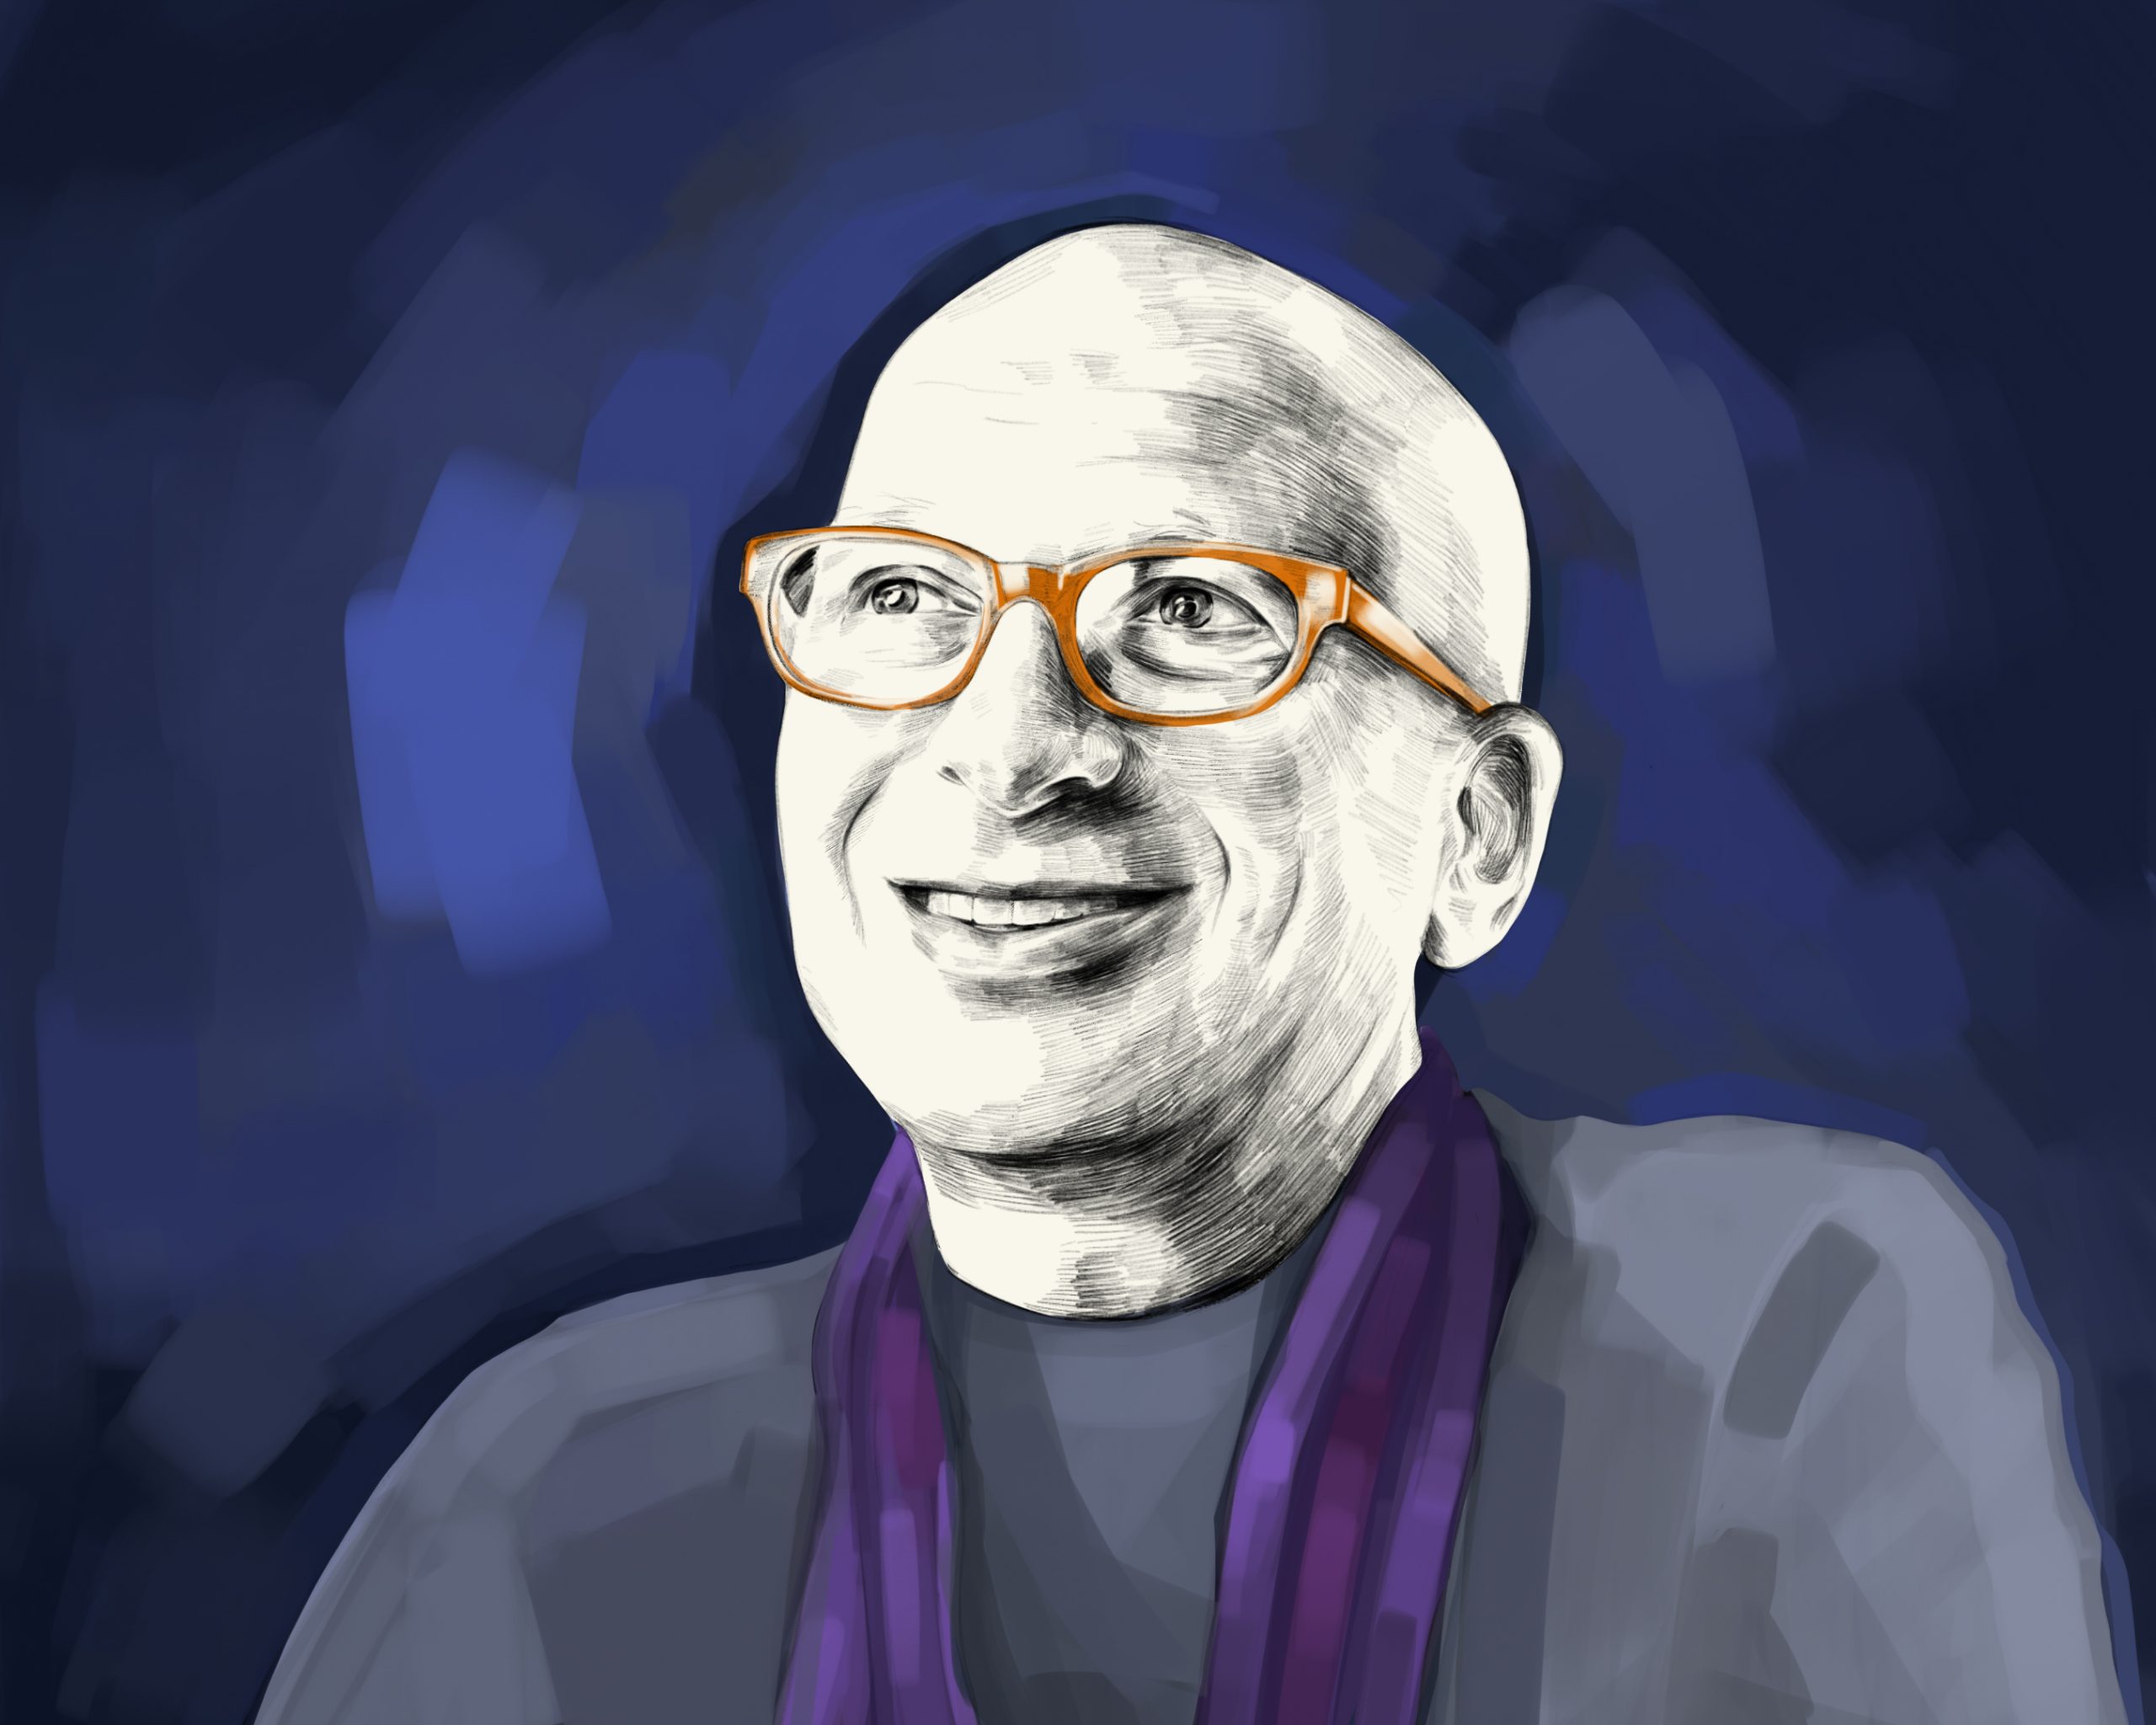 The Tim Ferriss Show Transcripts: Seth Godin — Coaching Tim on Overcoming Resistance, Lessons from Isaac Asimov, Writing Secrets After 8,500+ Daily Blog Posts, The Dangers of Authenticity, Practices for Consistency, and Much More (#728)